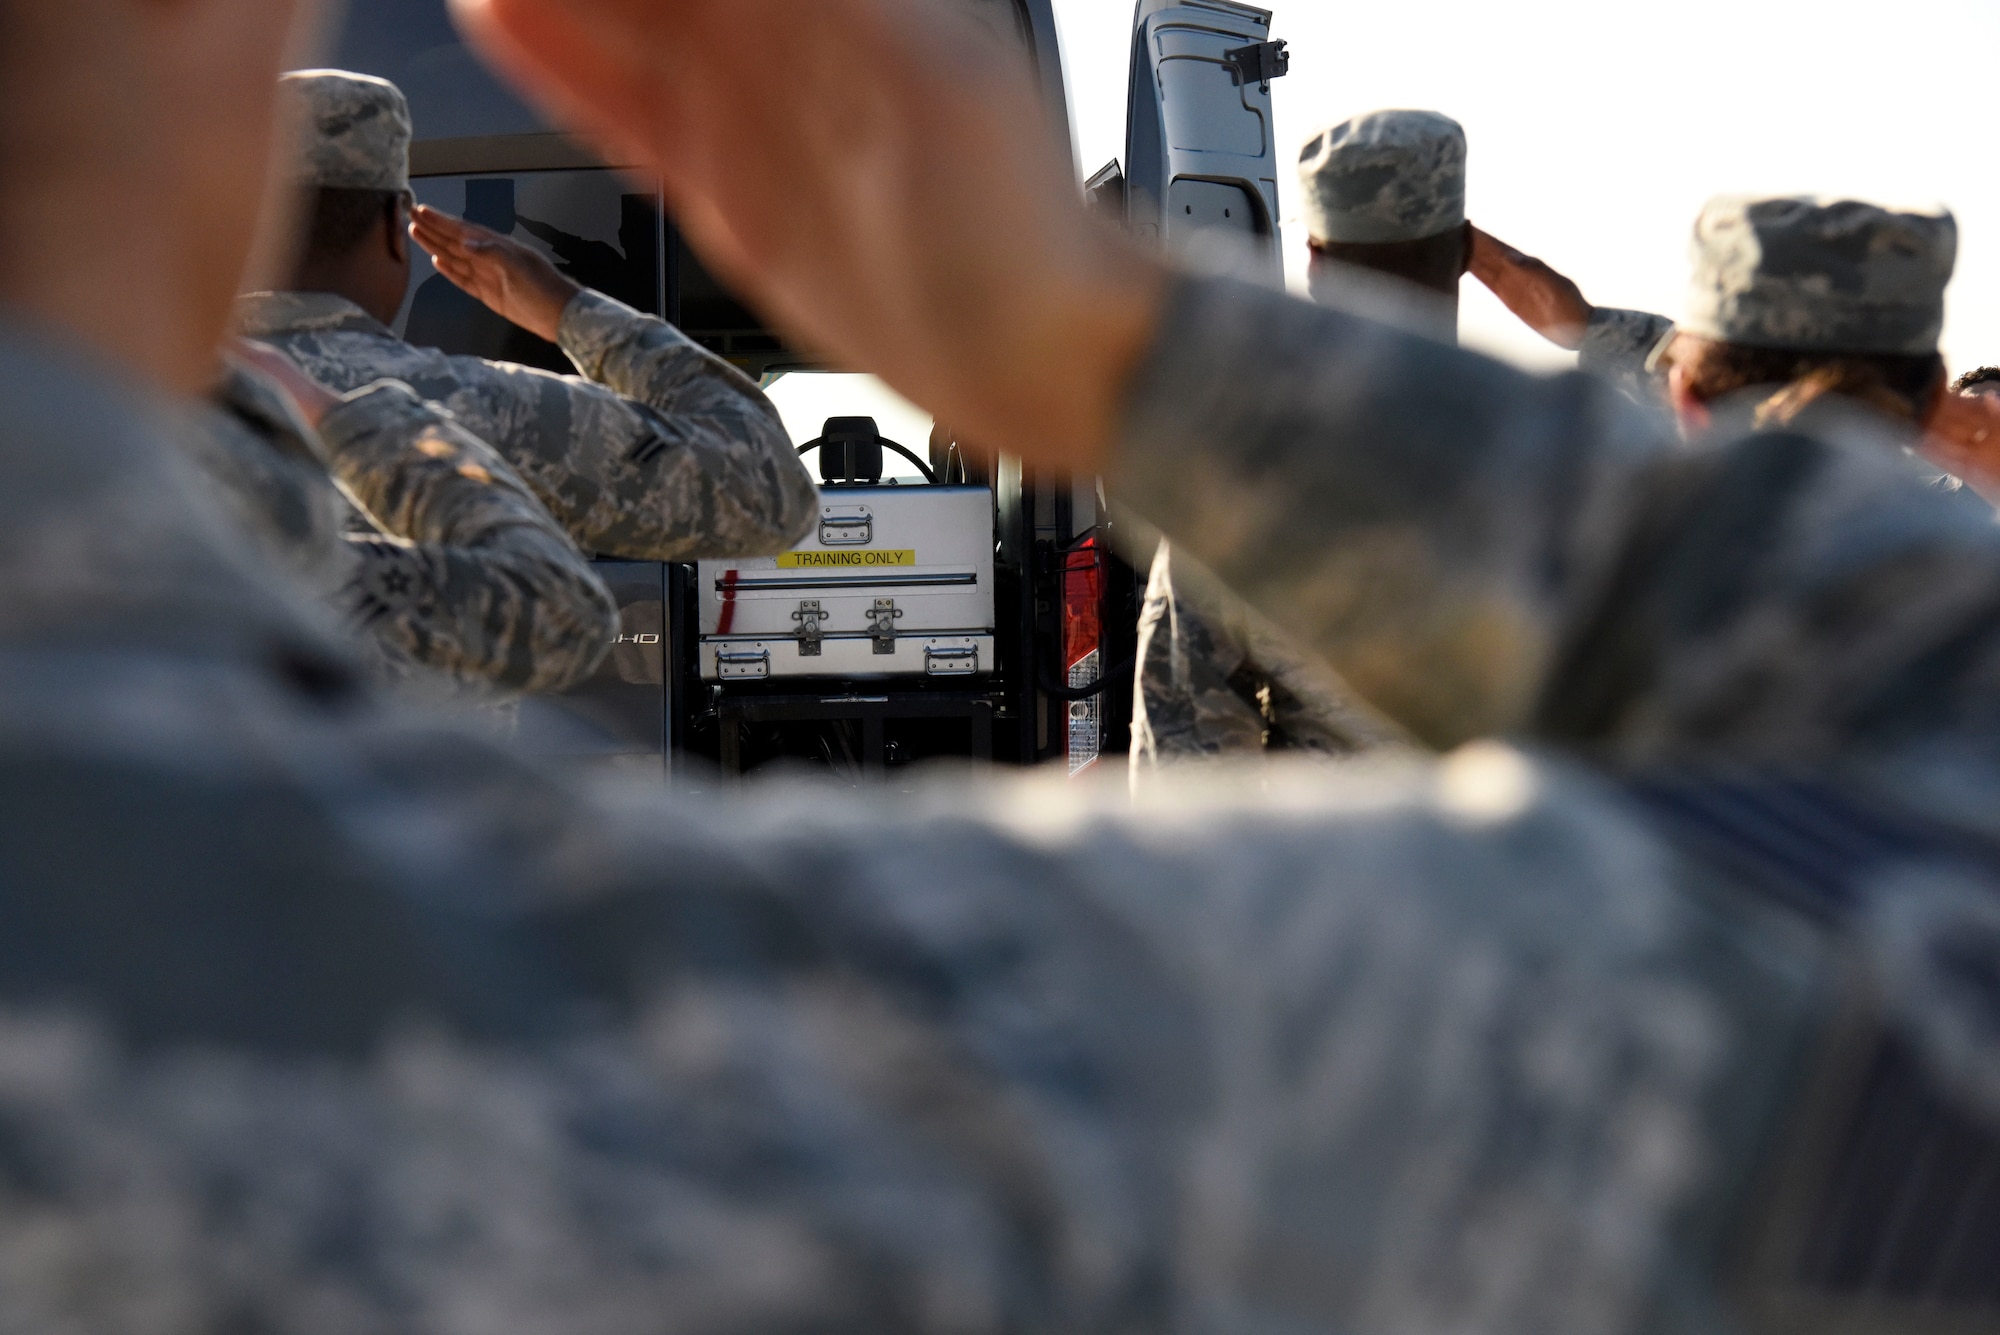 United States Air Force active duty and Reserve Airmen practice their movements during dignified transfer training for Air Force Mortuary Affairs Operations Aug. 23, 2018, at Dover Air Force Base, Del. A dignified transfer is the process by which, upon the return from the theater of operations to the United States, the remains of fallen military members are transferred from the aircraft to a waiting vehicle and then to the port mortuary. (U.S. Air Force photo by Airman 1st Class Zoe M. Wockenfuss)